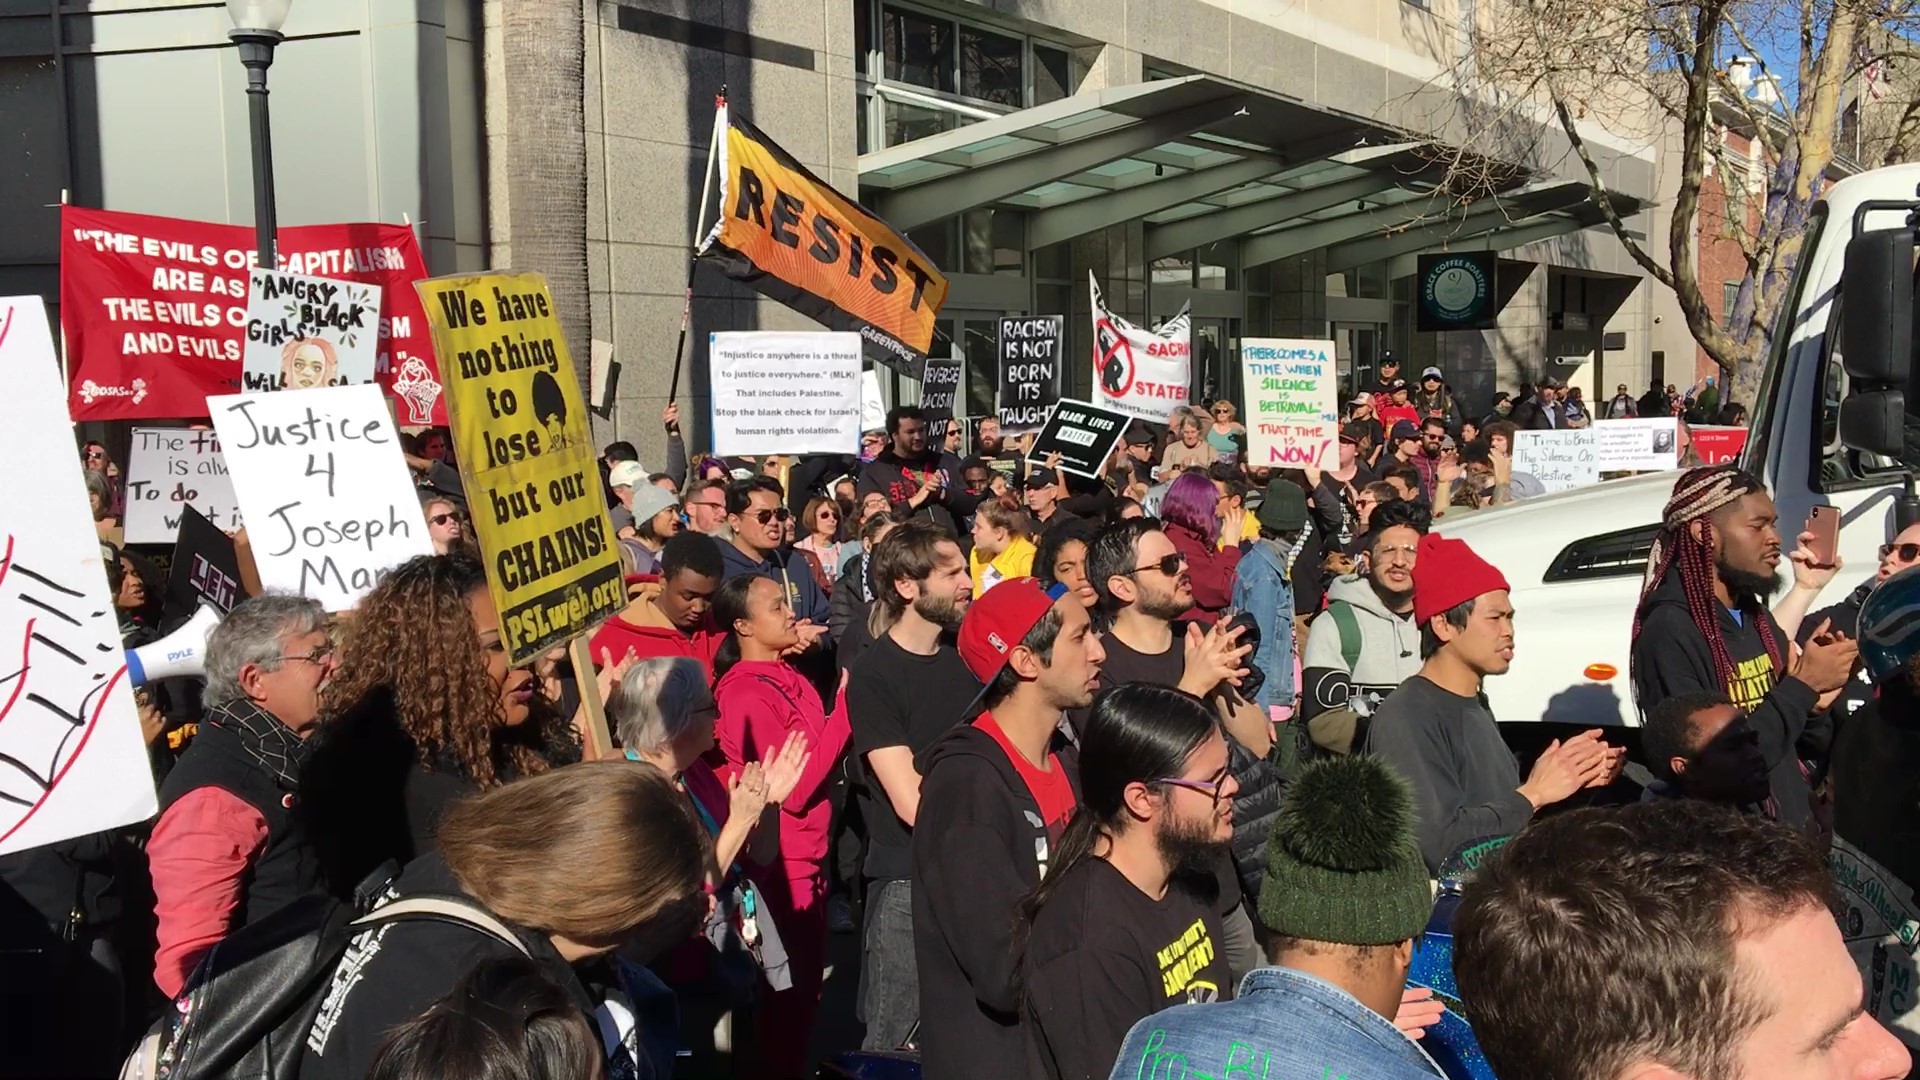 Thousands hit the streets of downtown Sacramento to take part in the annual Martin Luther King Jy. Day March. But after all the city has been through the last year, there was one question ABC10 set out to get answered.